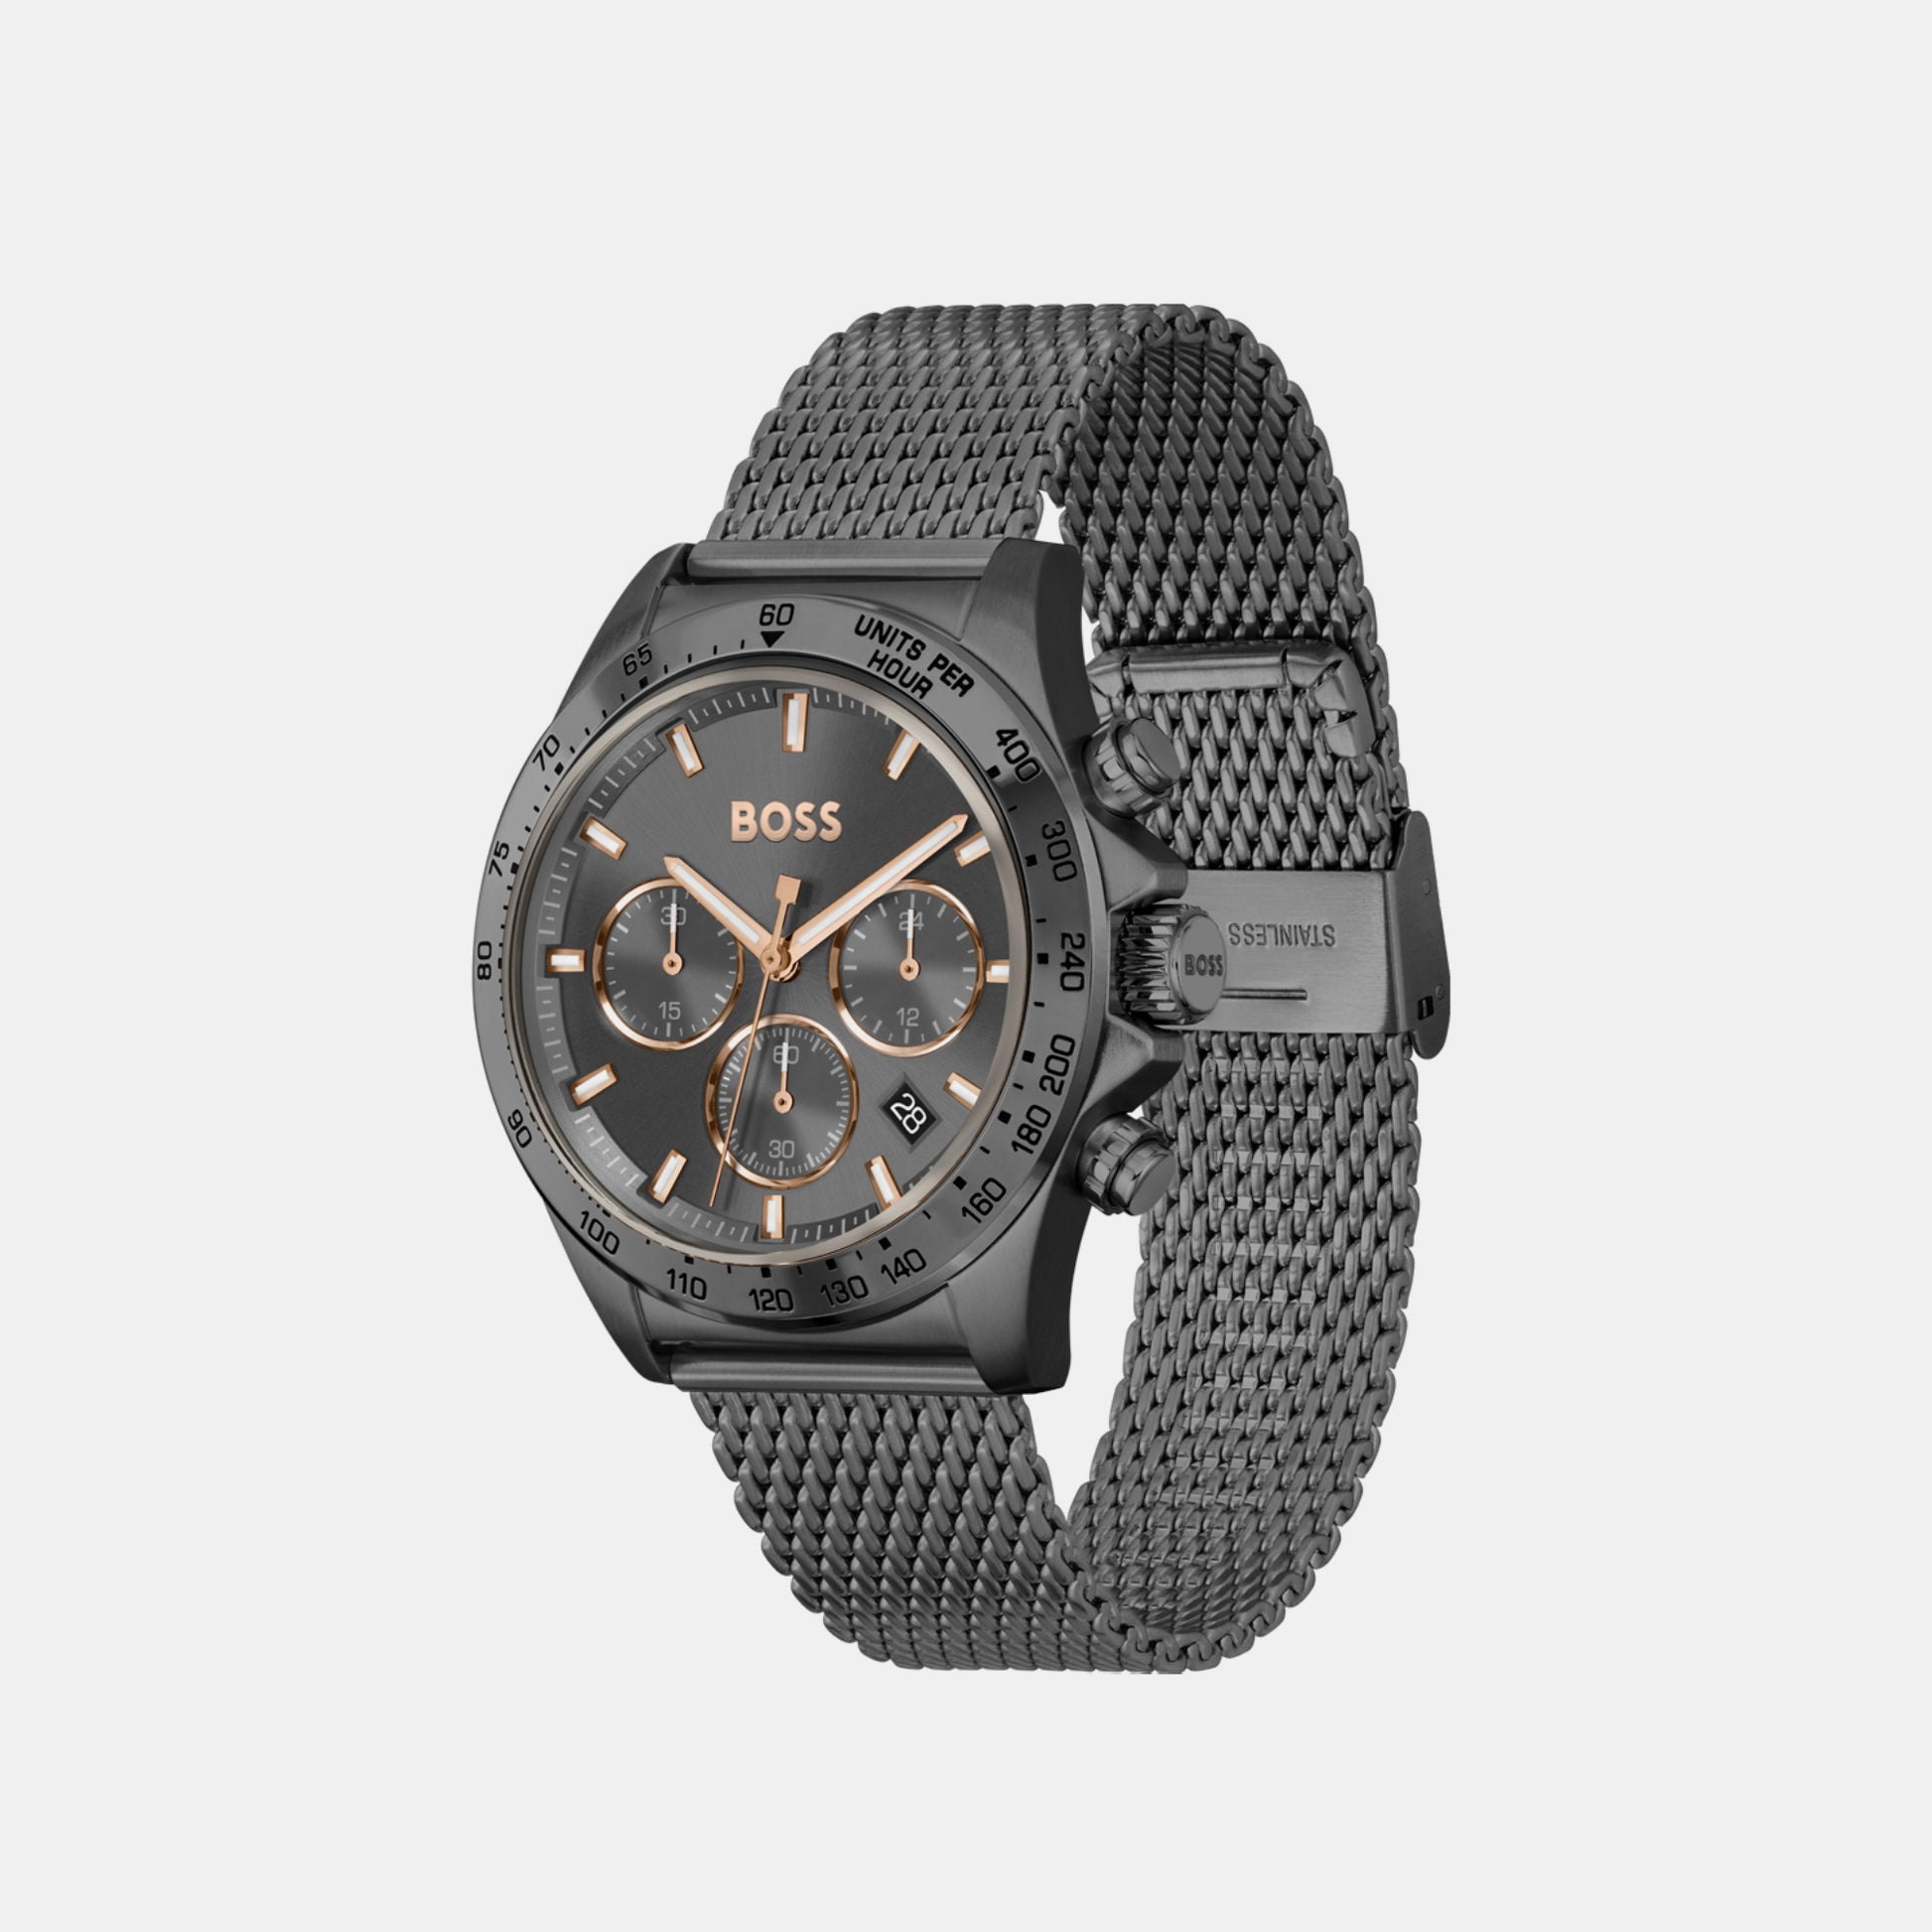 Hero Male Grey Mesh Watch – Just Time Chronograph In 1514021